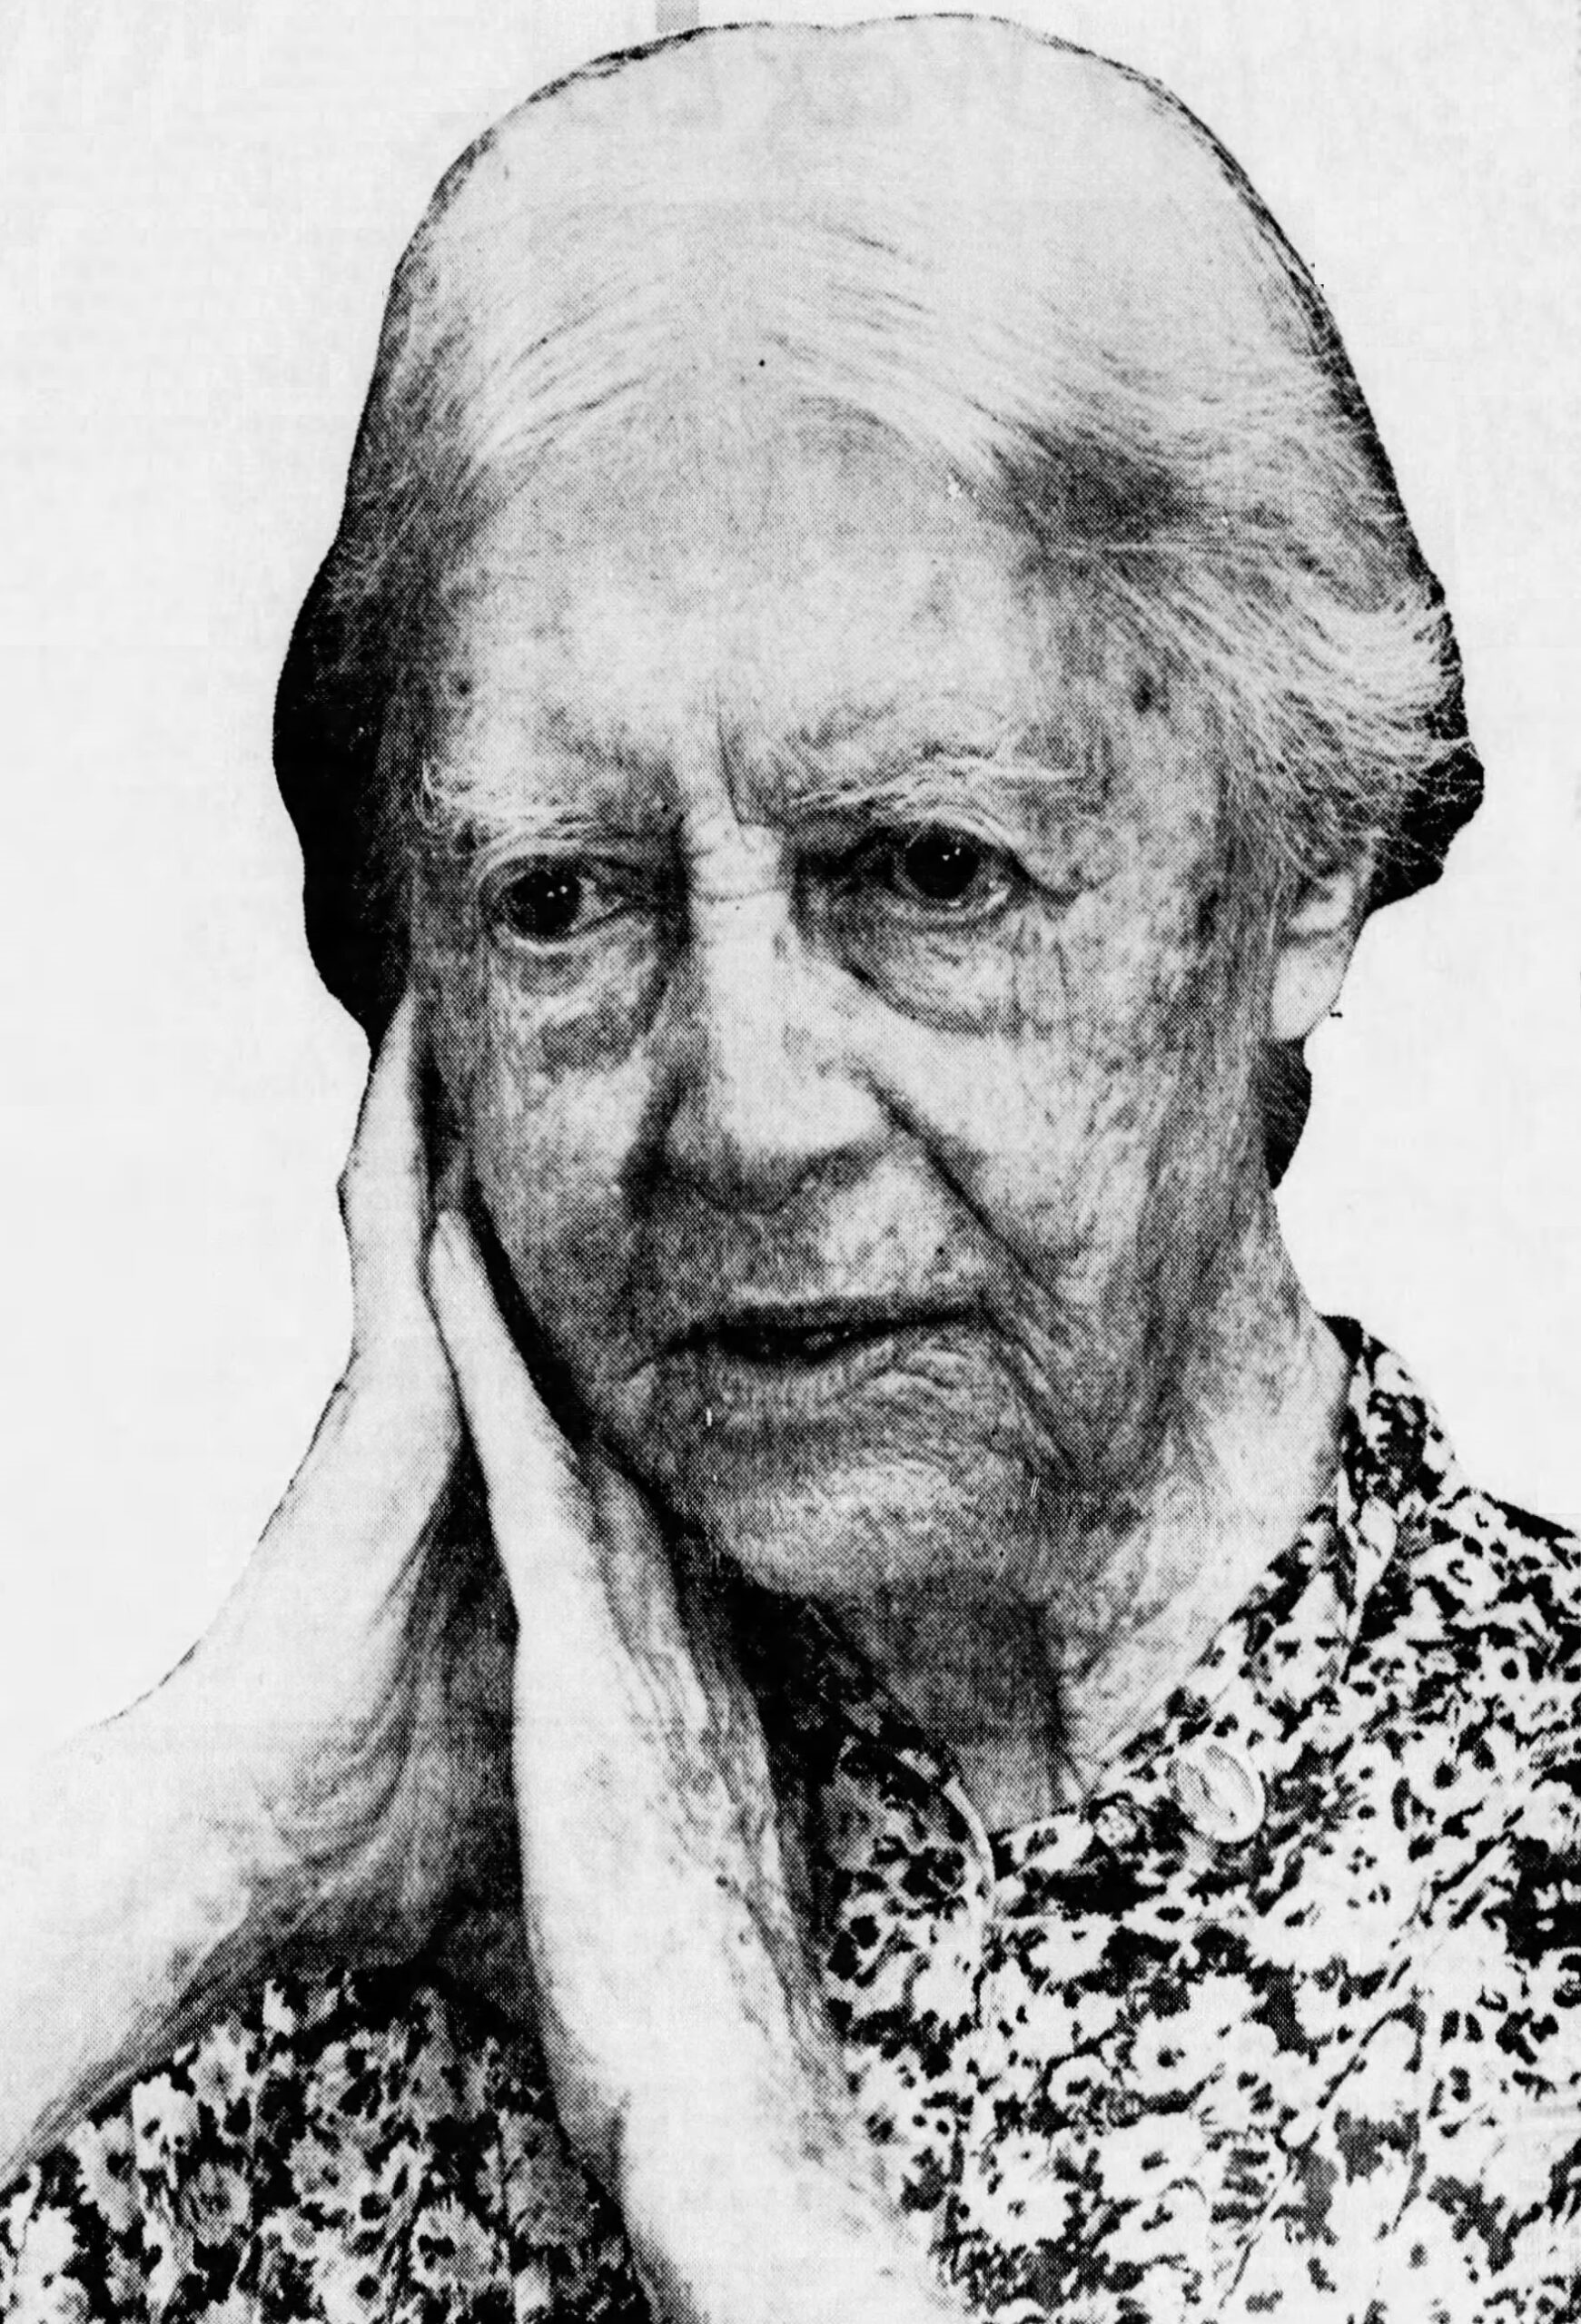 In July 1982, aged 102. (Source: The Pittsburgh Press)